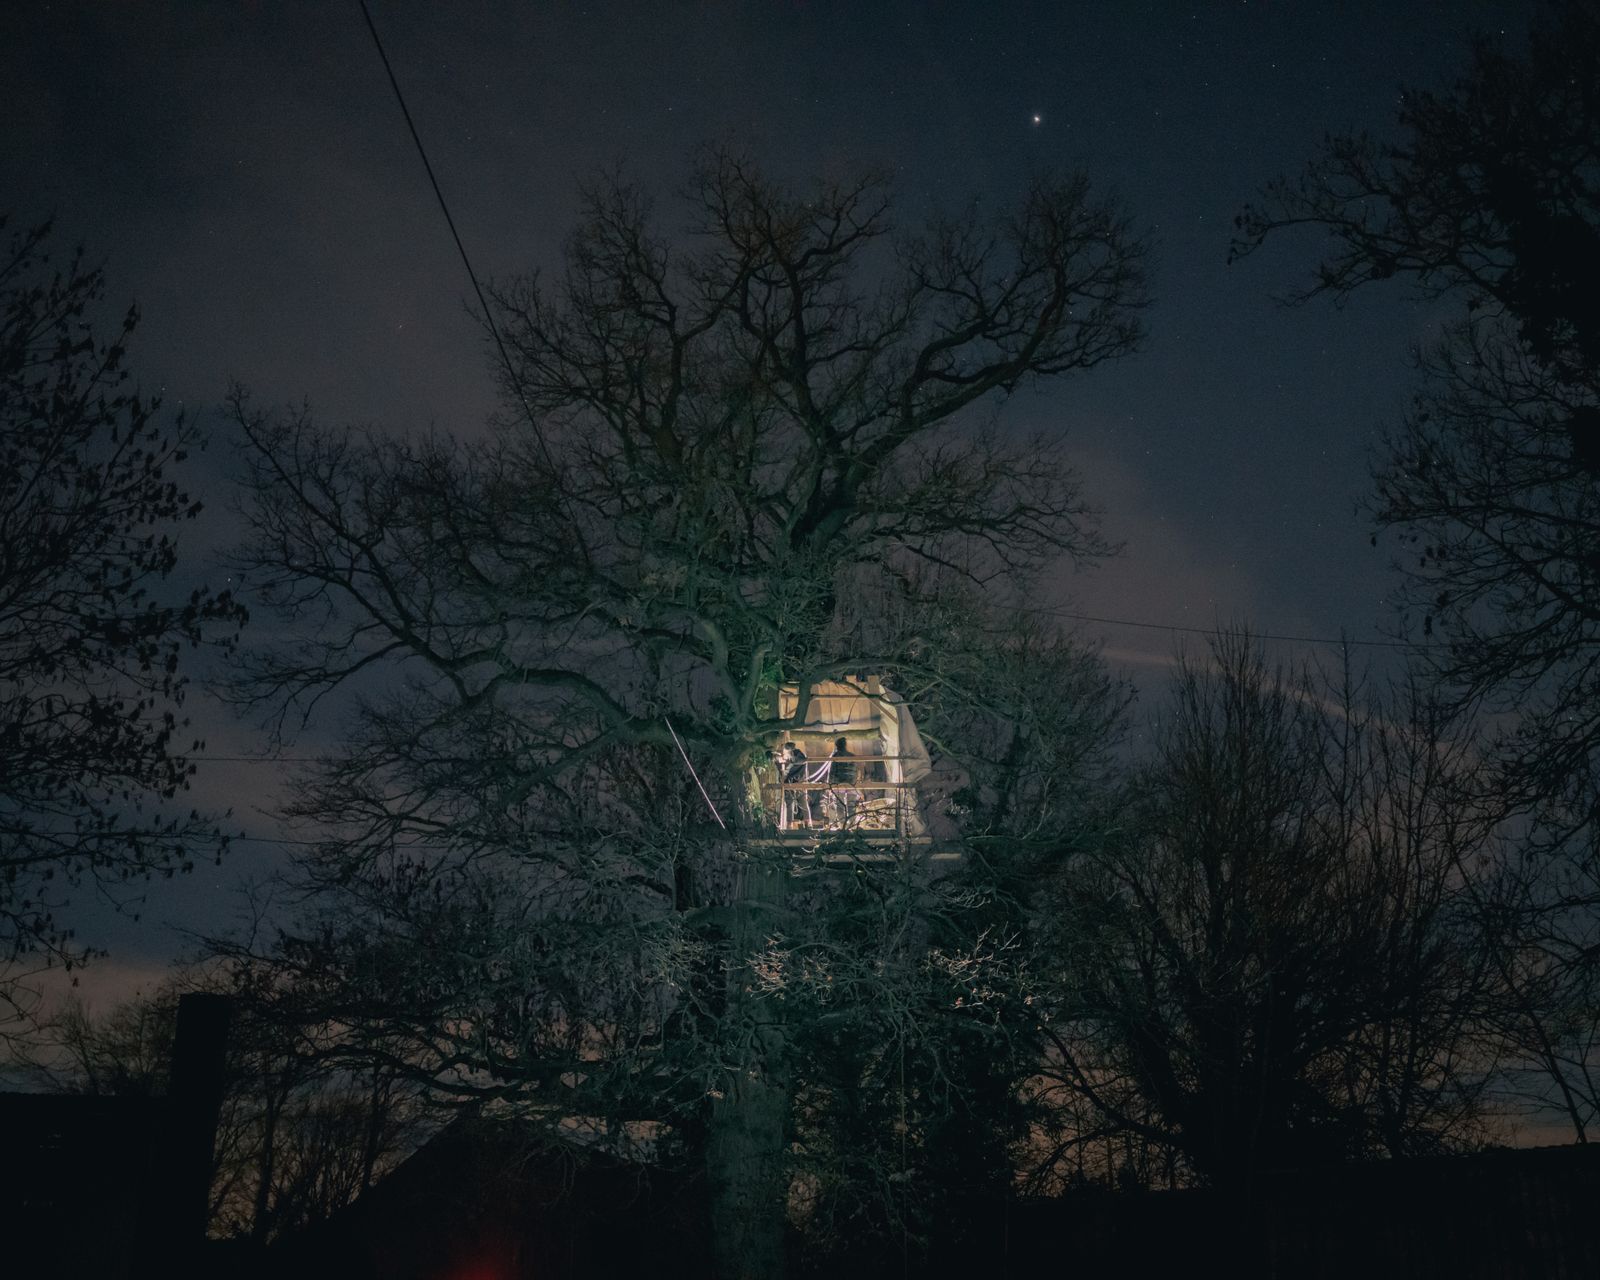 © Ingmar Björn Nolting - Activists prepare a tree house for eviction in Lützerath, Germany on January 08, 2023.